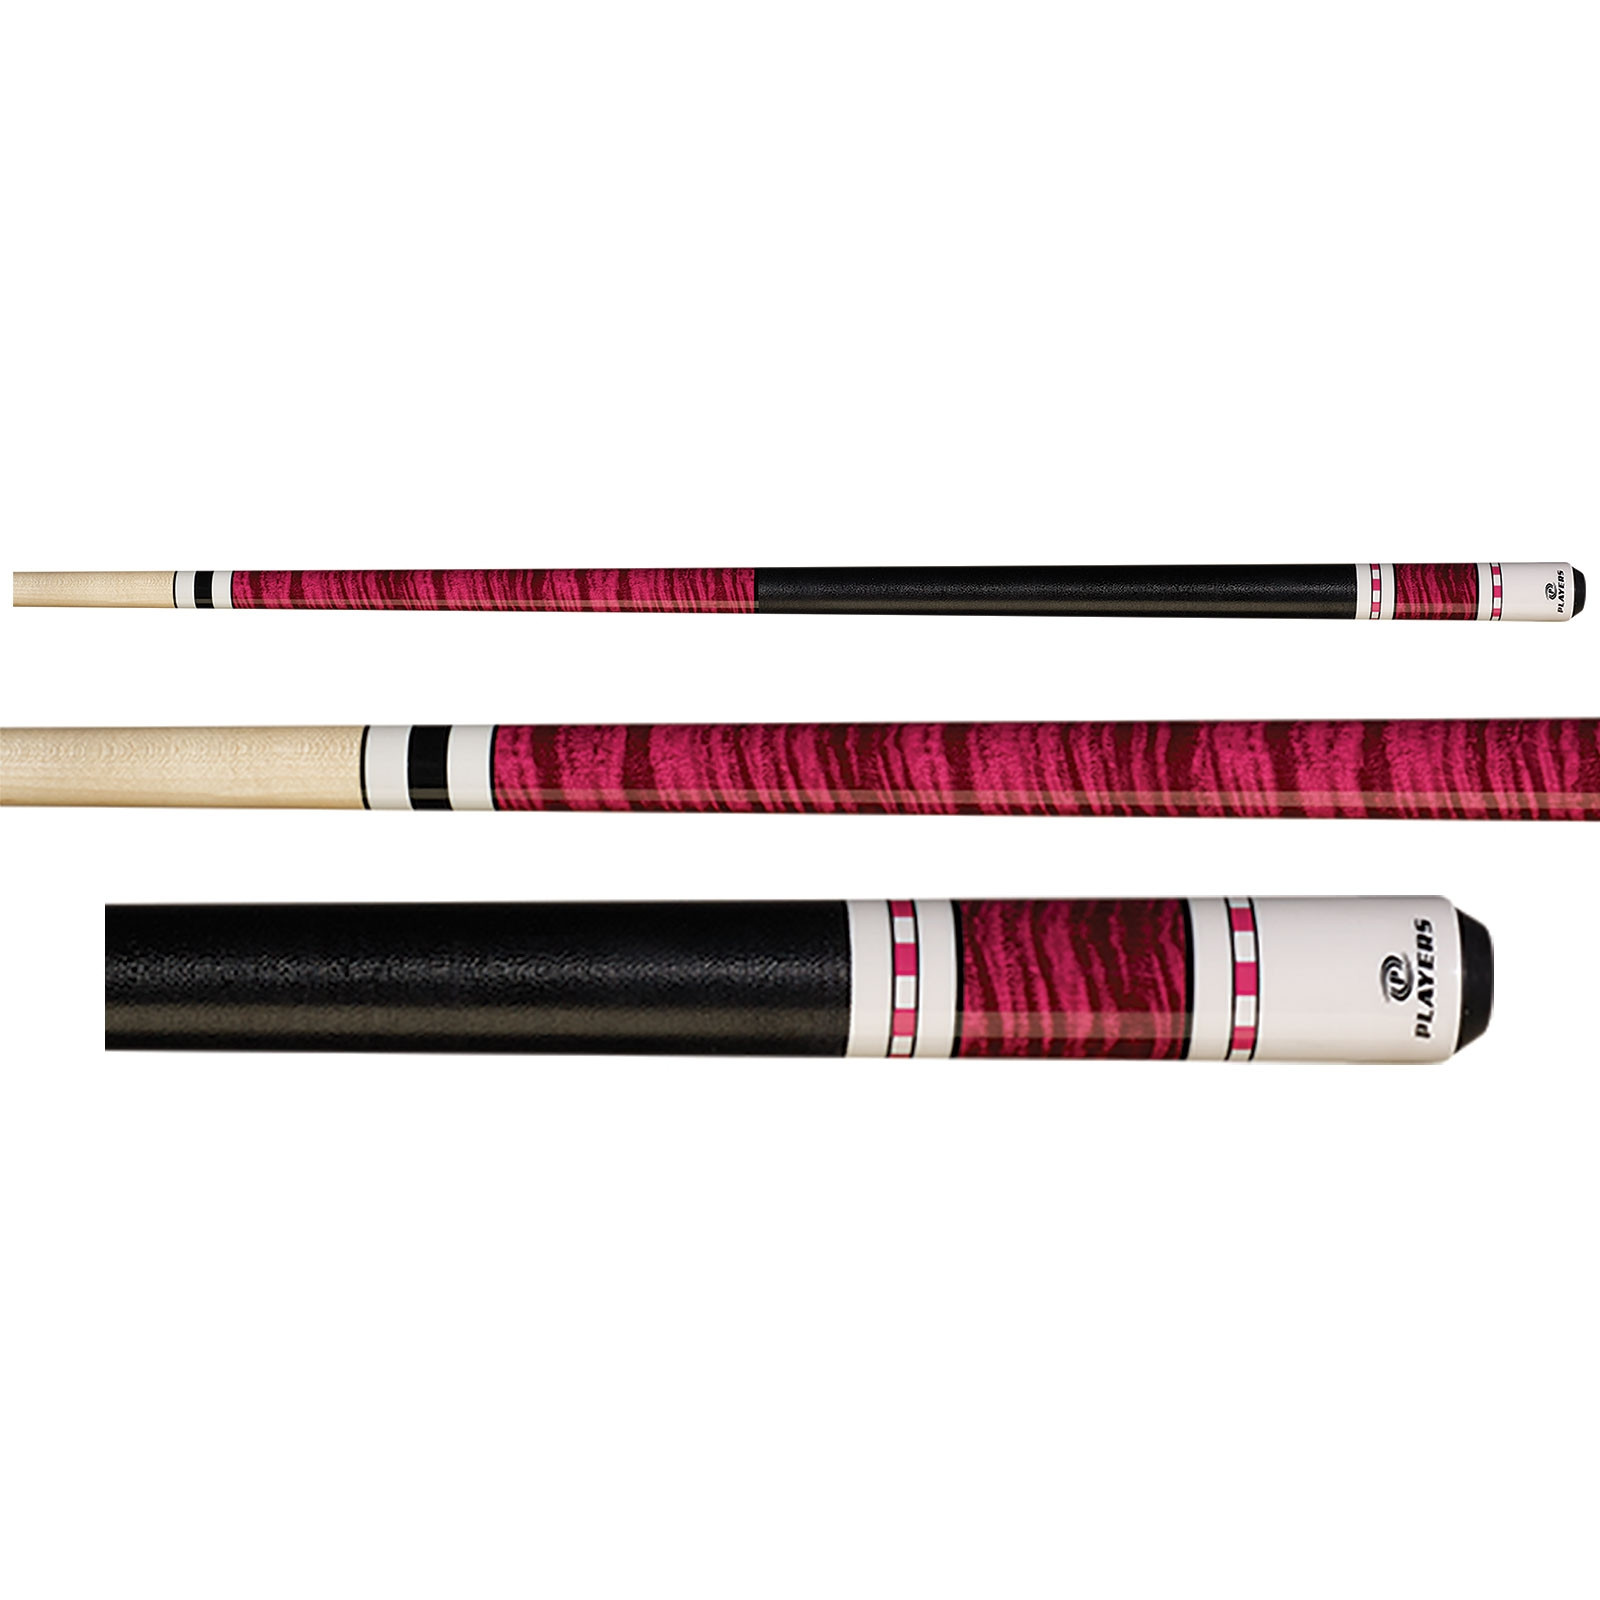 Players C-942 Hot Pink Pool Cue